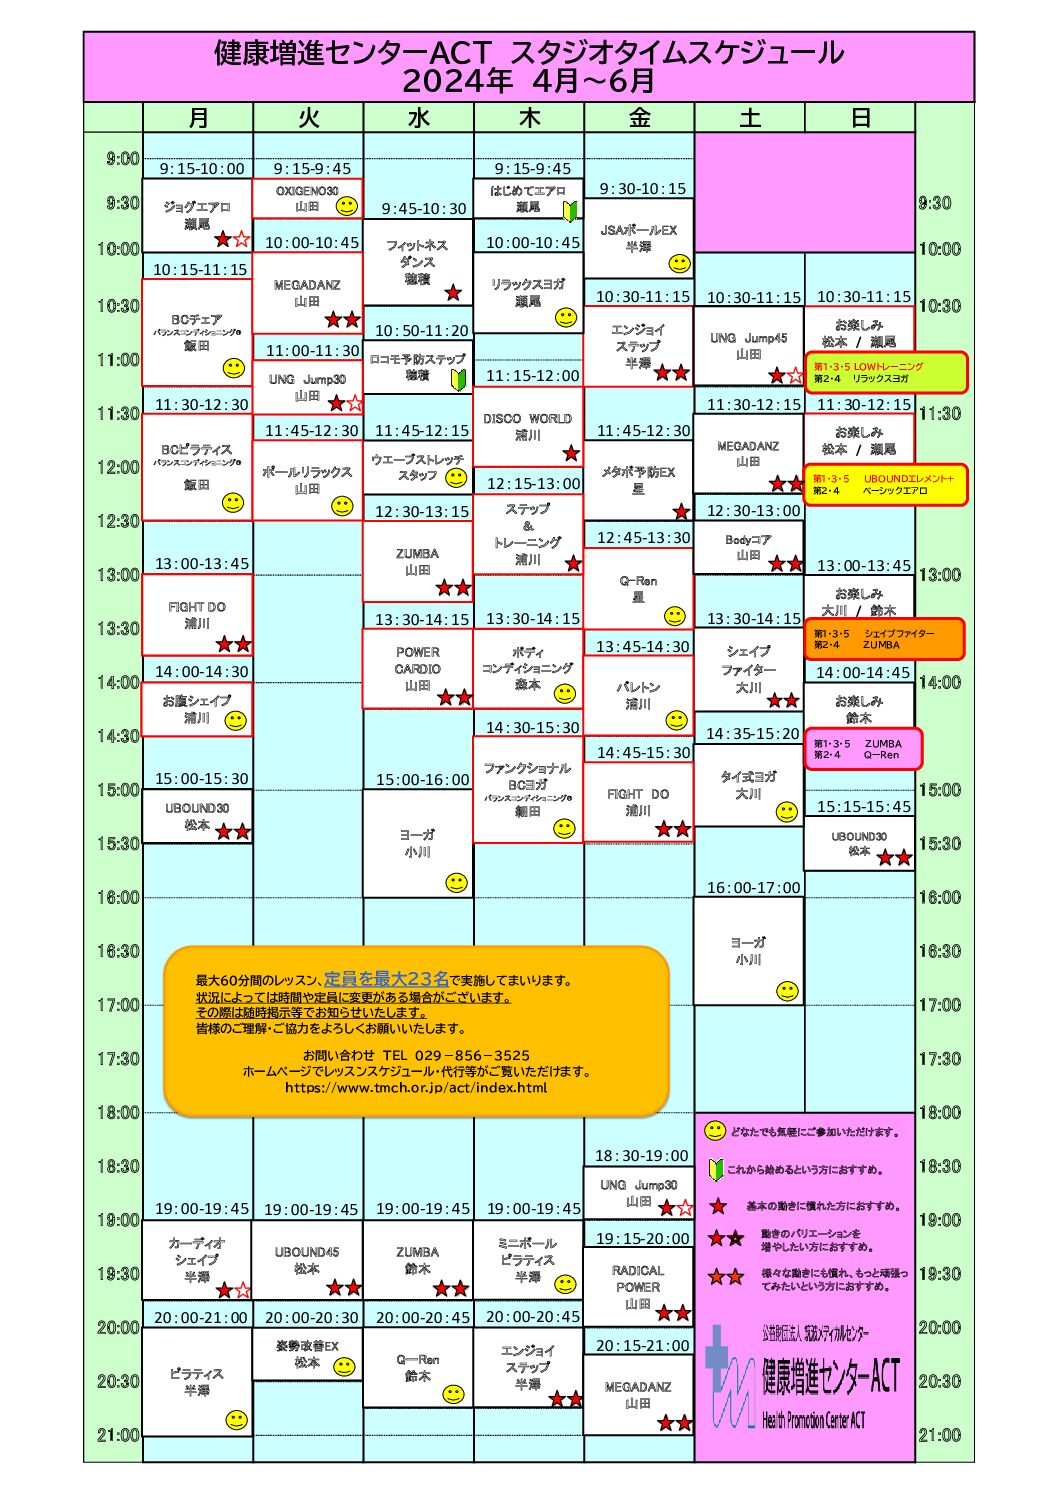 This is the studio timetable from April to June 2024.